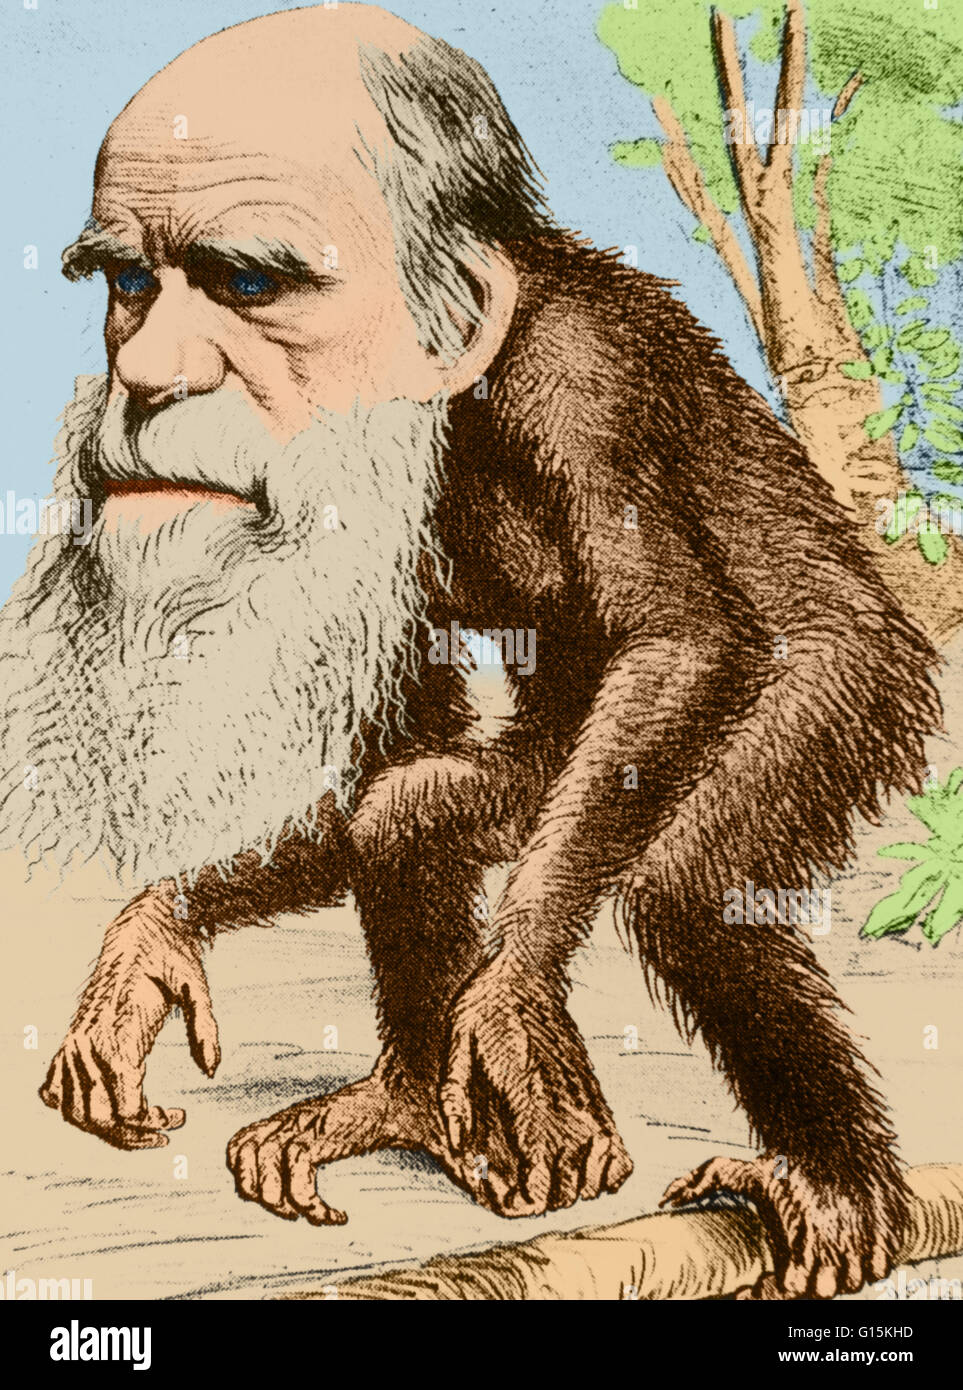 Color enhanced illustration of Charles Darwin portrayed as a 'Venerable Orang-Outang', subtitled 'Contribution to Unnatural History' that appeared March 22nd, 1871, in the satirical magazine 'The Hornet'. Charles Robert Darwin (1809-1882) was an English n Stock Photo